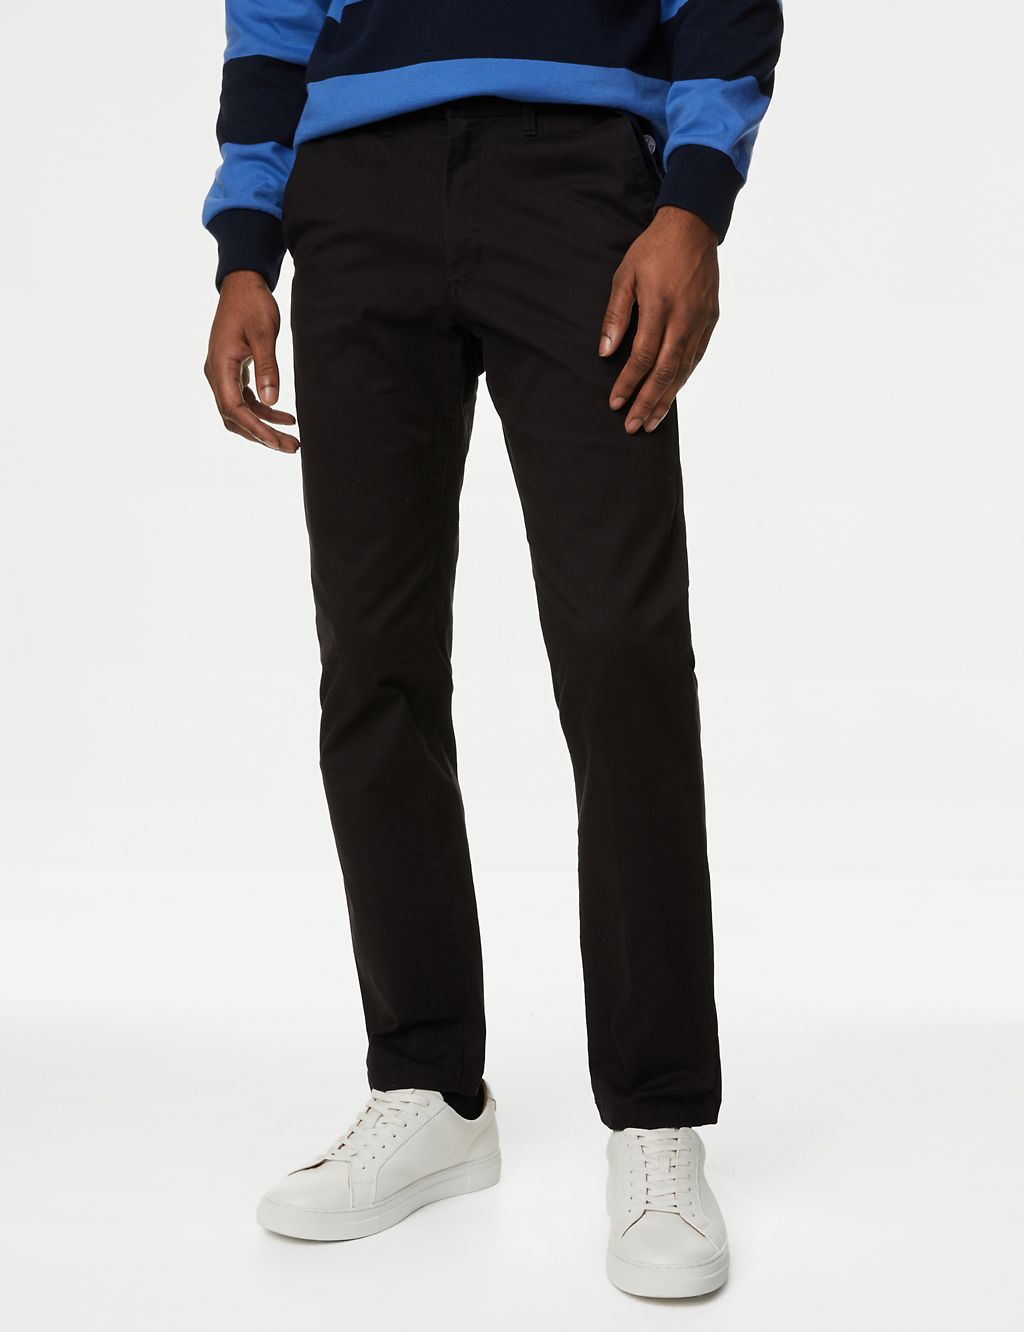 Regular Fit Heritage Chinos | M&S Collection | M&S